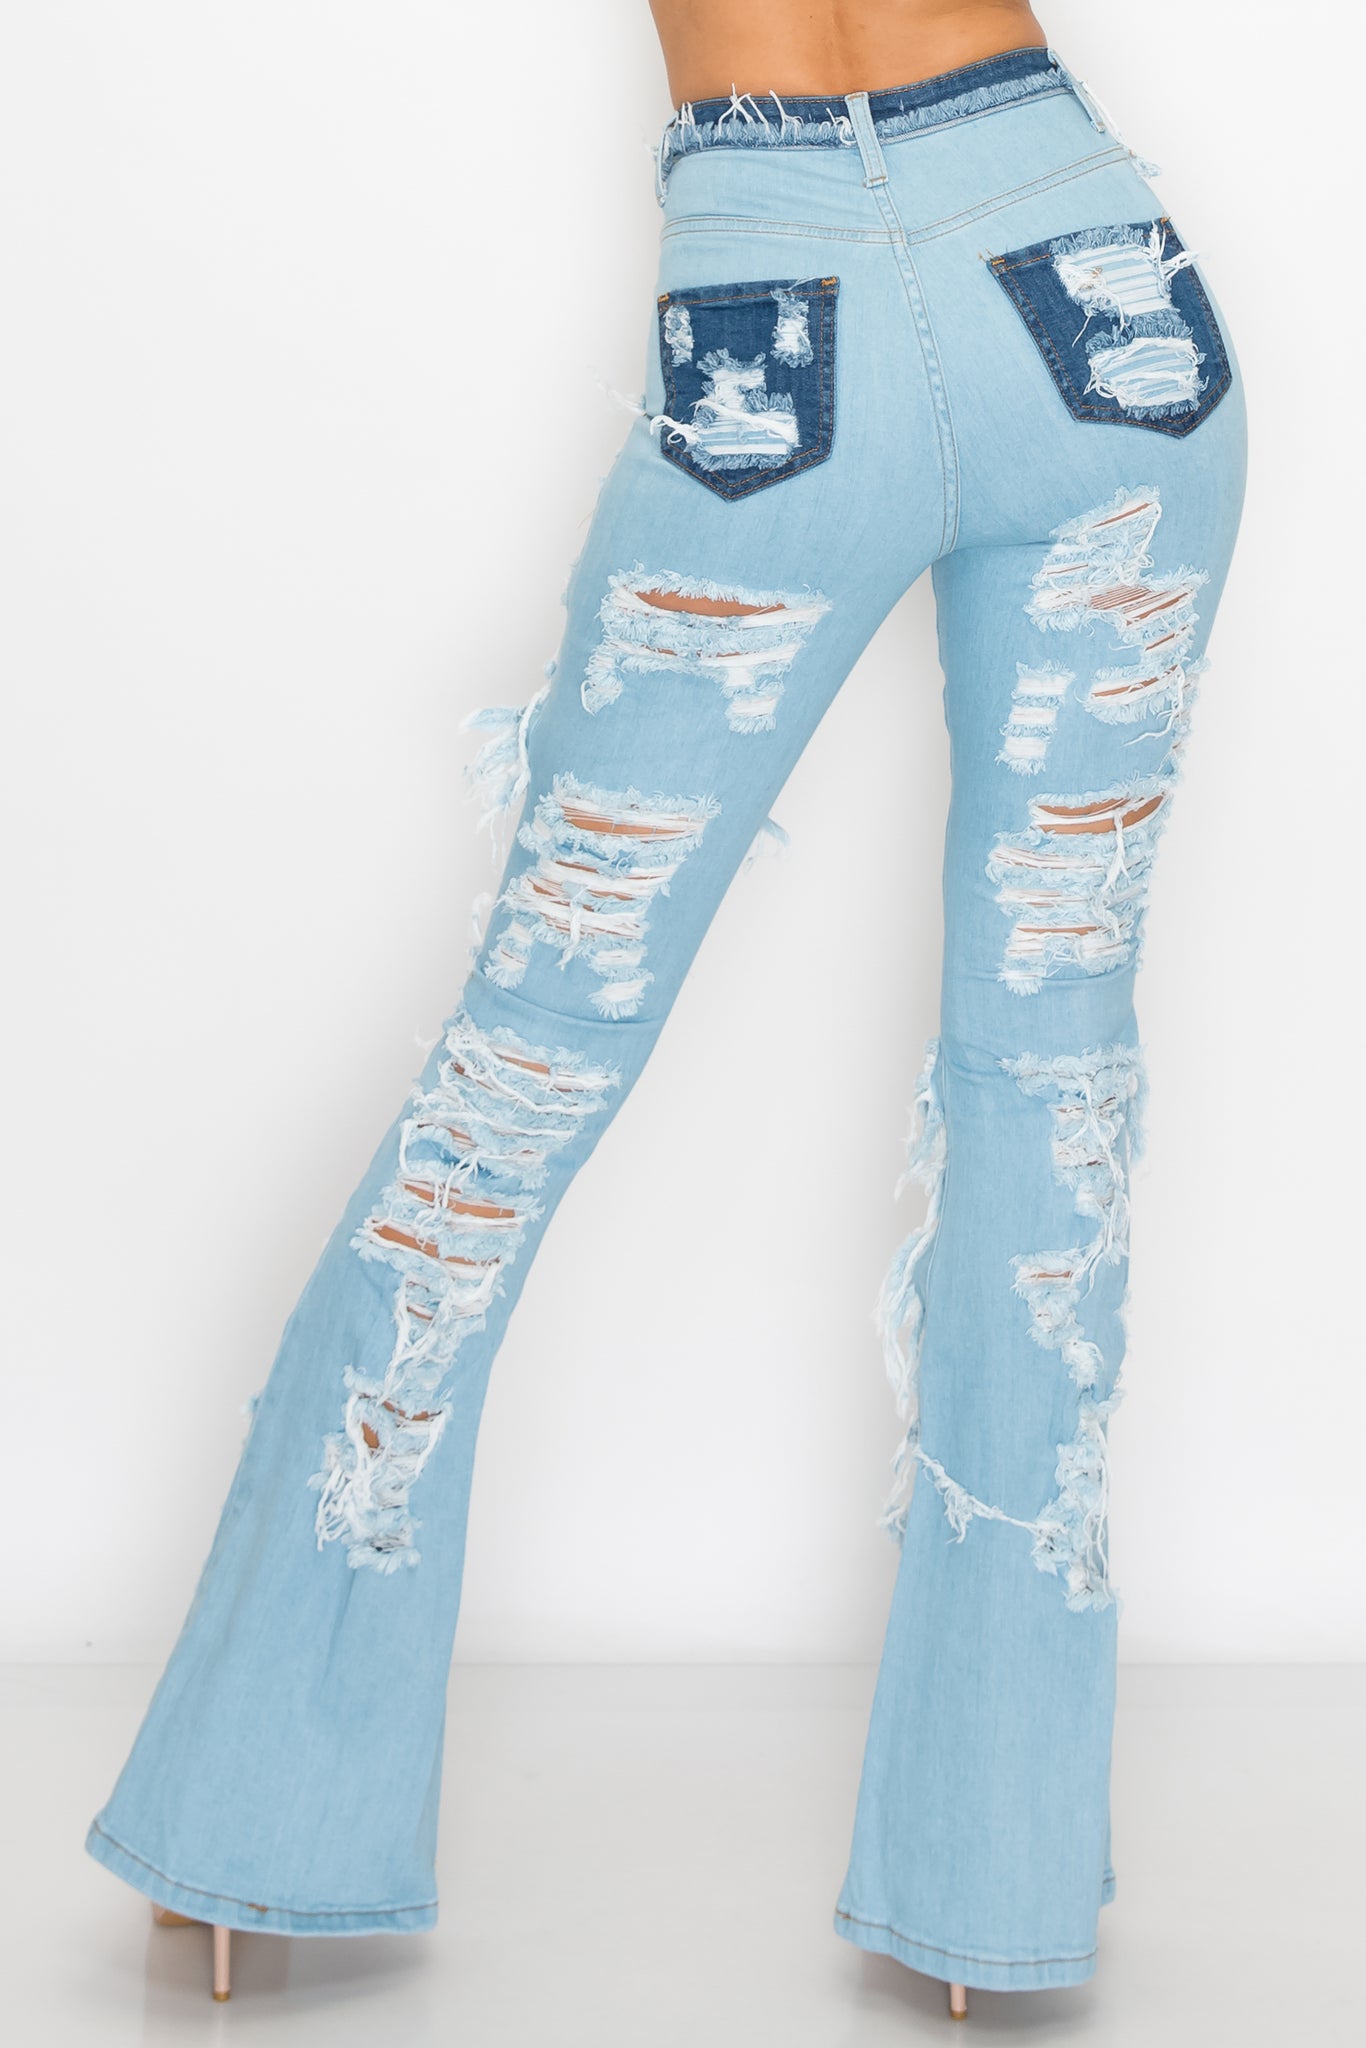 2143 Woman High Rise Light Flare Jeans W/Knee & Tight Slices – Aphrodite  Jeans